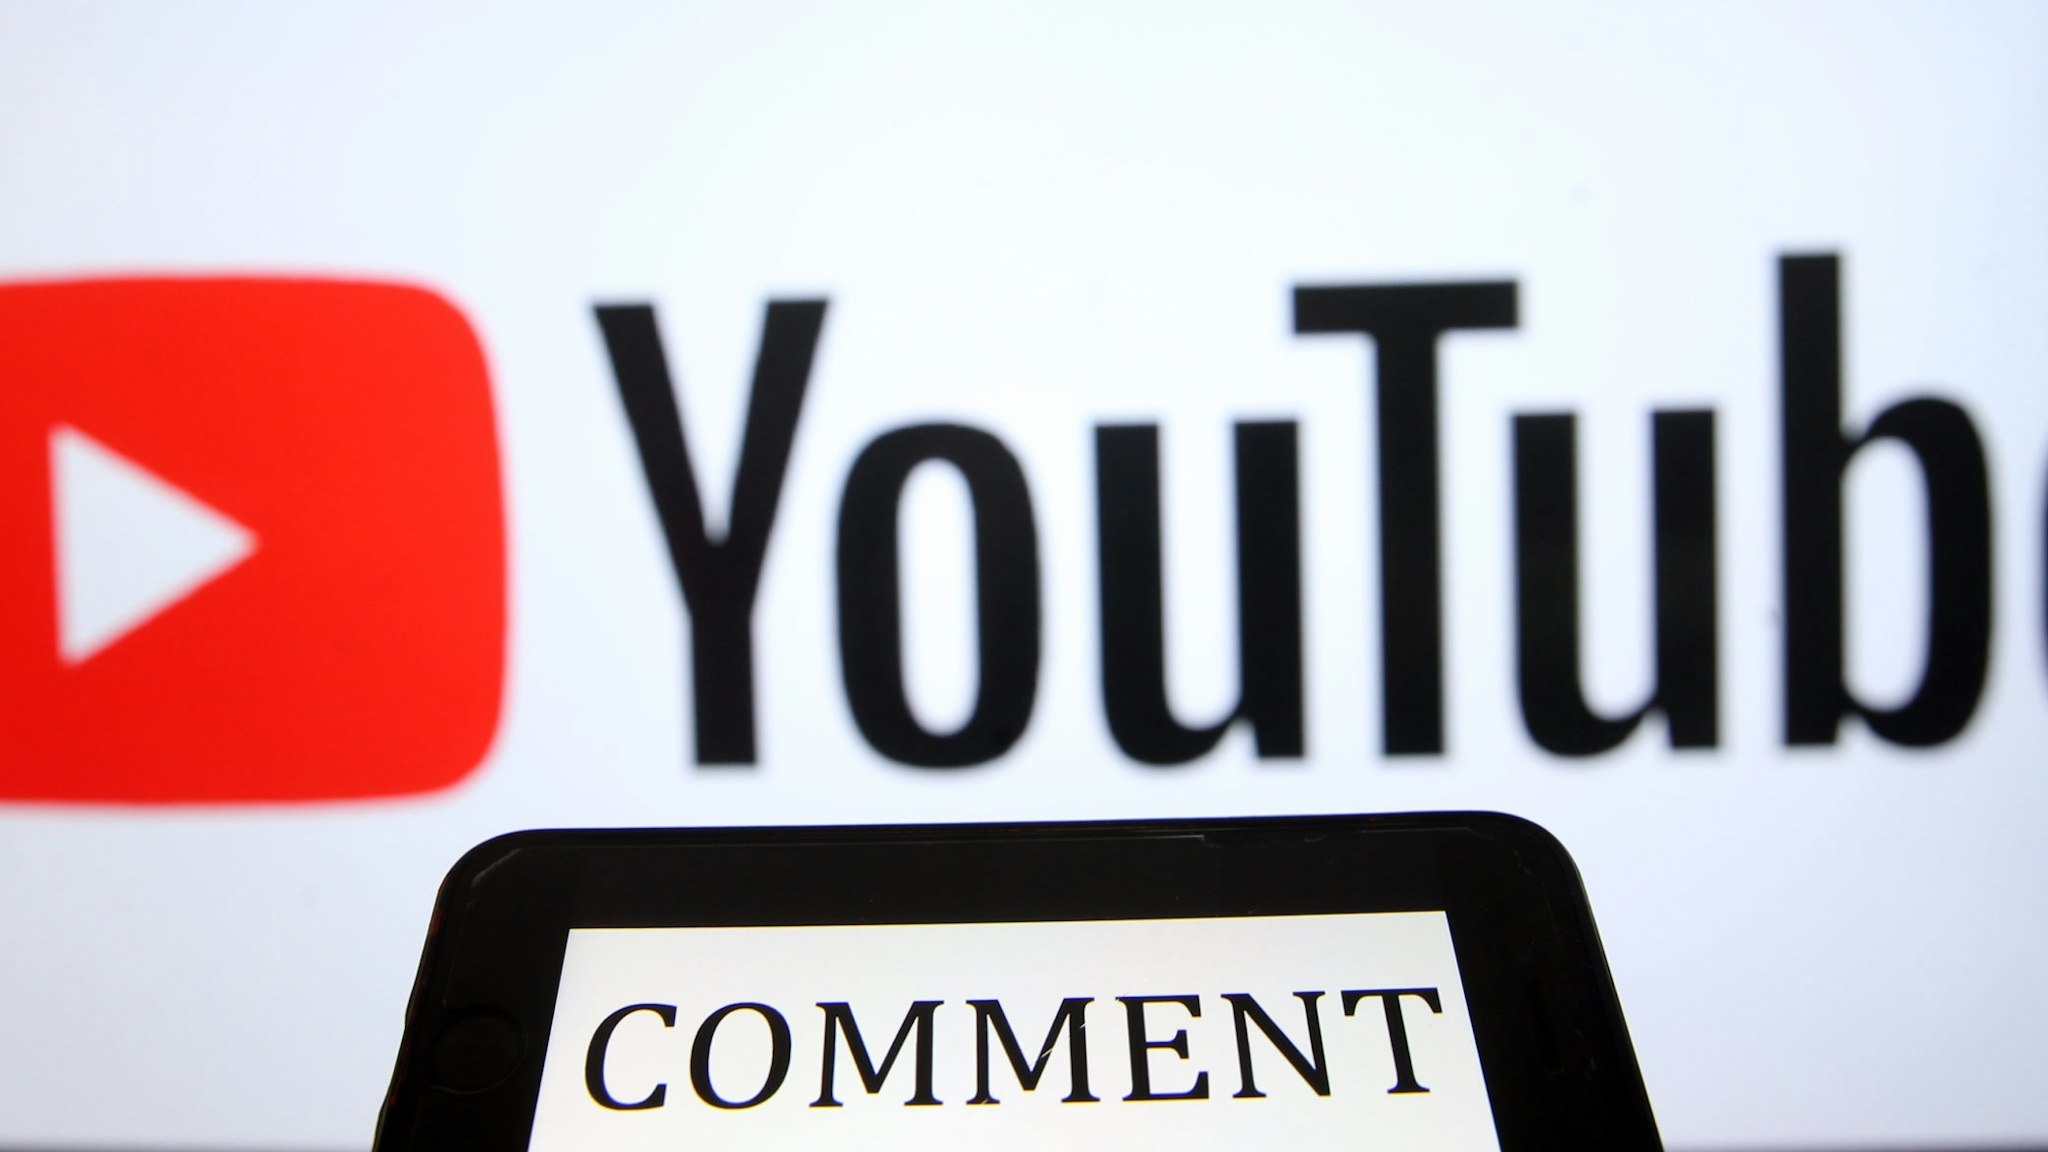 ANKARA, TURKEY - APRIL 28: YouTube logo is being displayed behind a text reading "comment" on a smart phone screen in Ankara, Turkey on April 28, 2020. Evrim AydÄ±n / Anadolu Agency